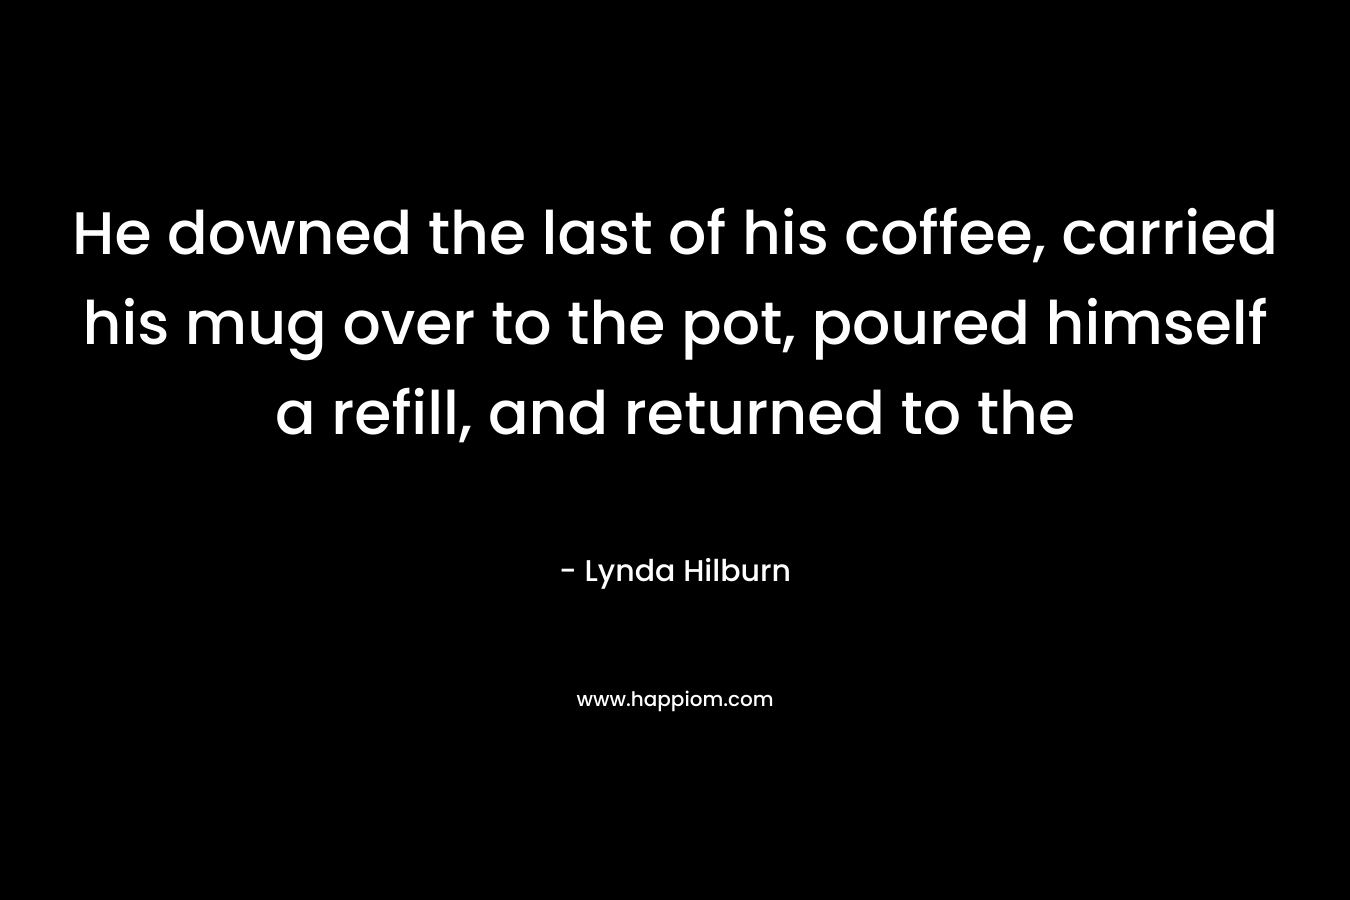 He downed the last of his coffee, carried his mug over to the pot, poured himself a refill, and returned to the  – Lynda Hilburn